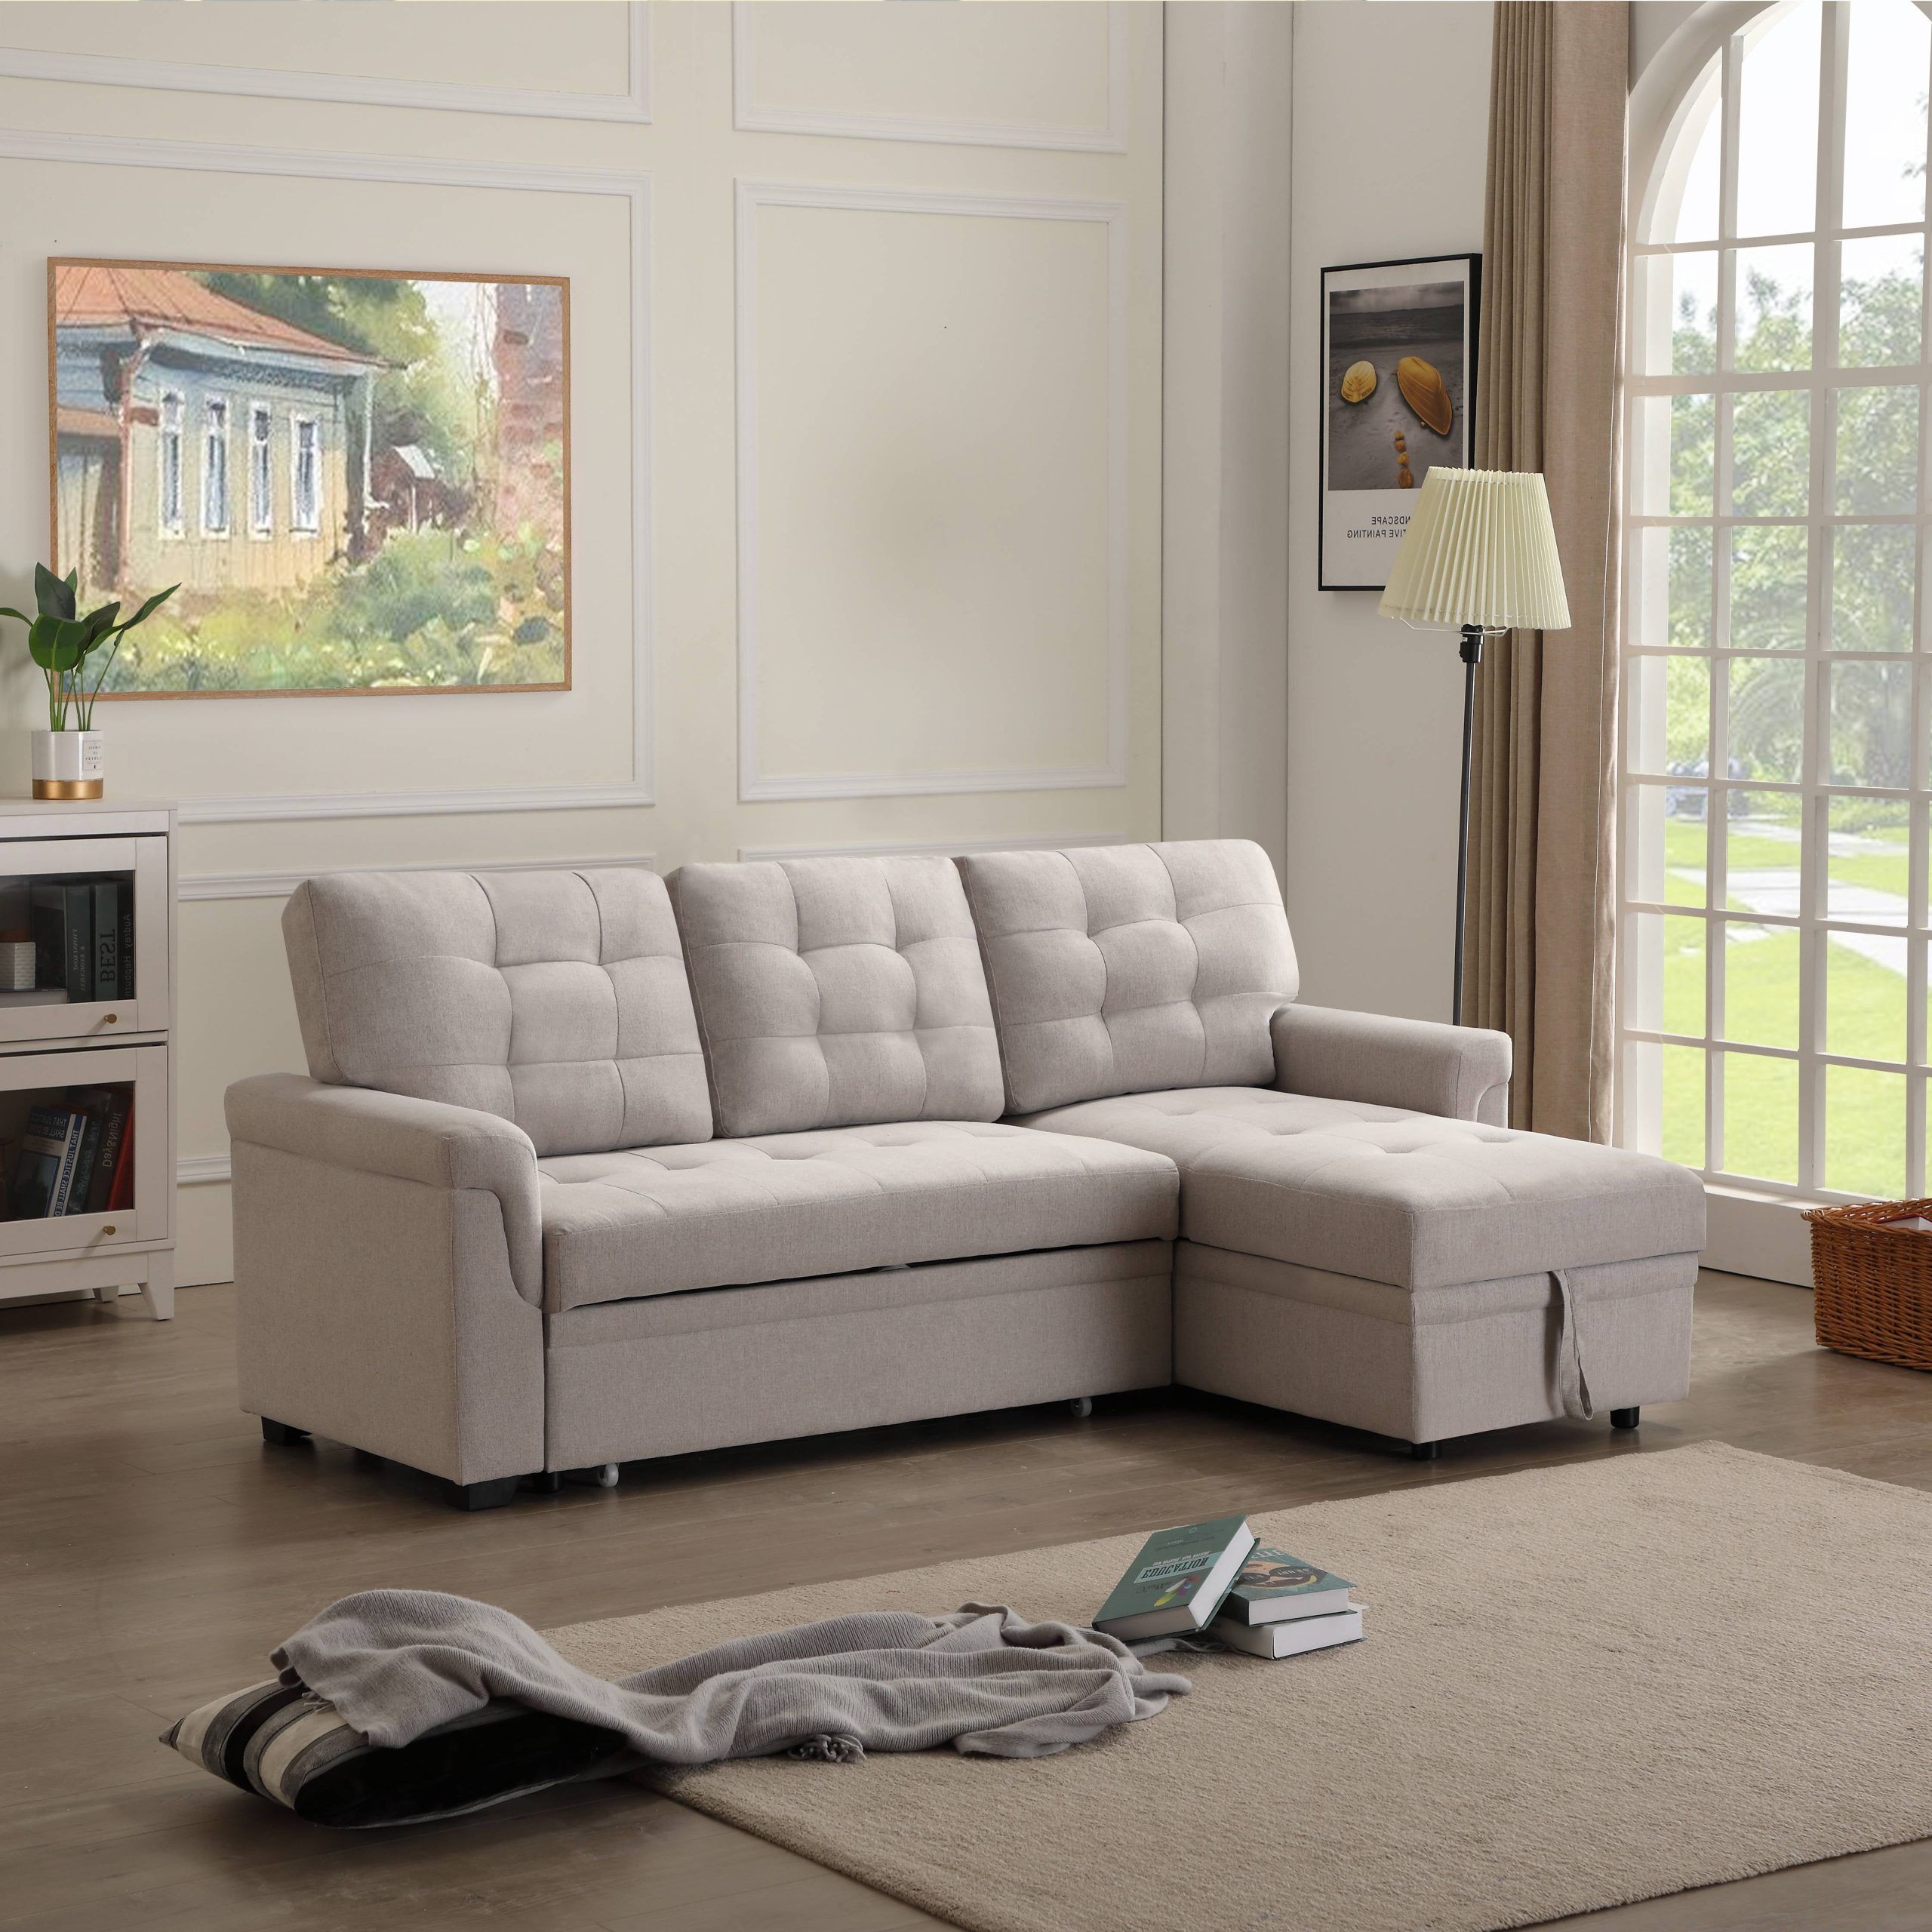 Featured Photo of The 20 Best Collection of Small L Shaped Sectional Sofas in Beige